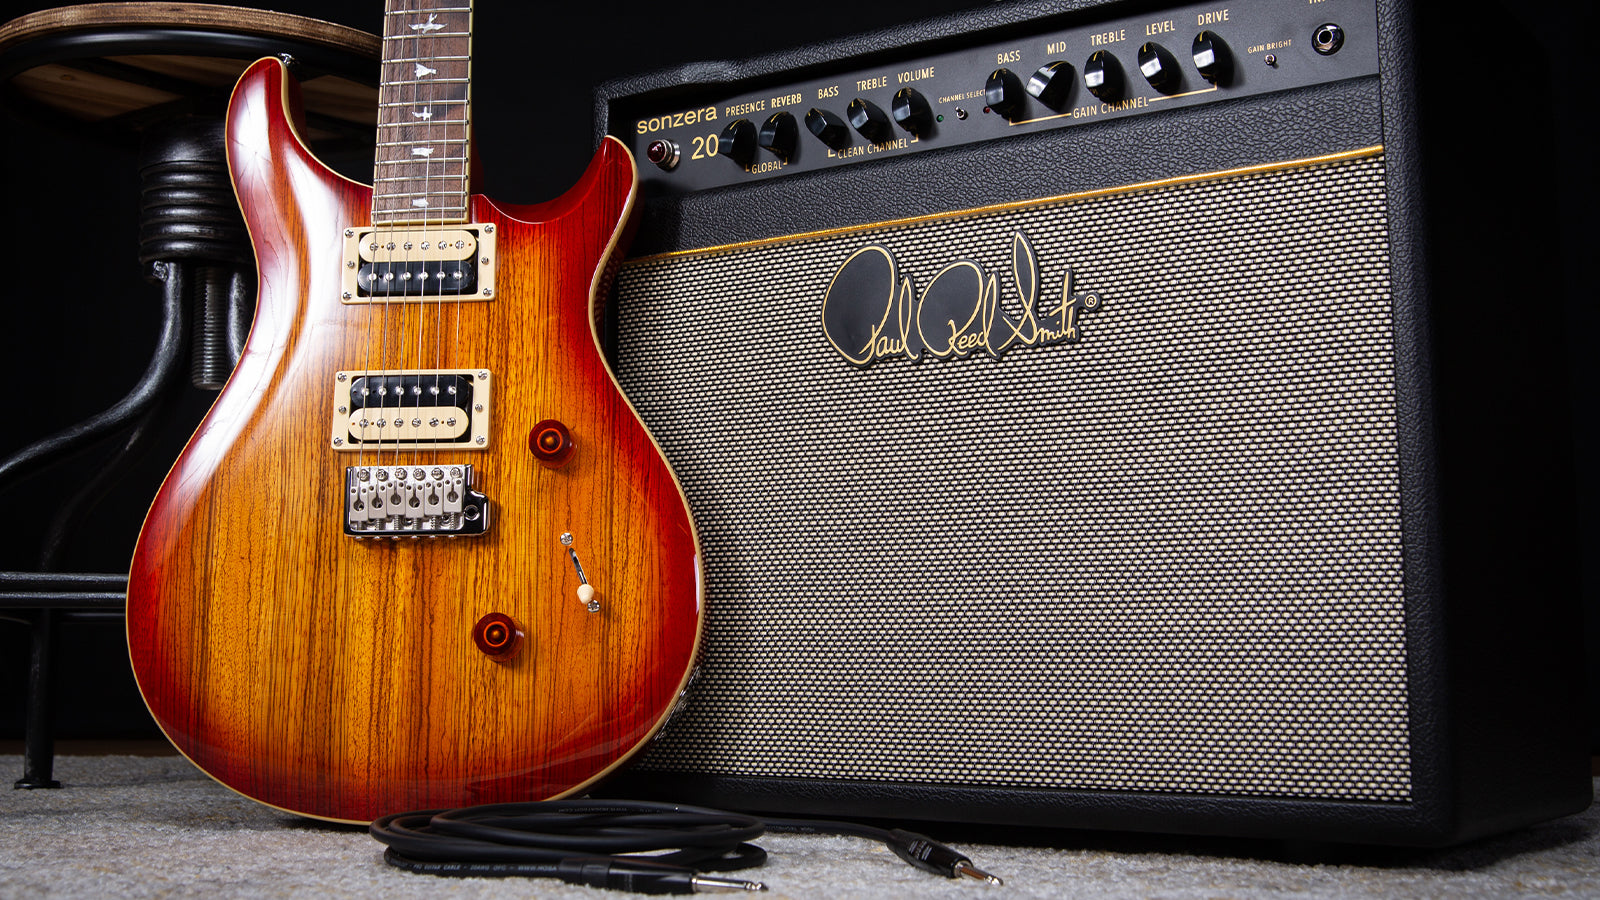 A PRS guitar leaning against a PRS amplifier